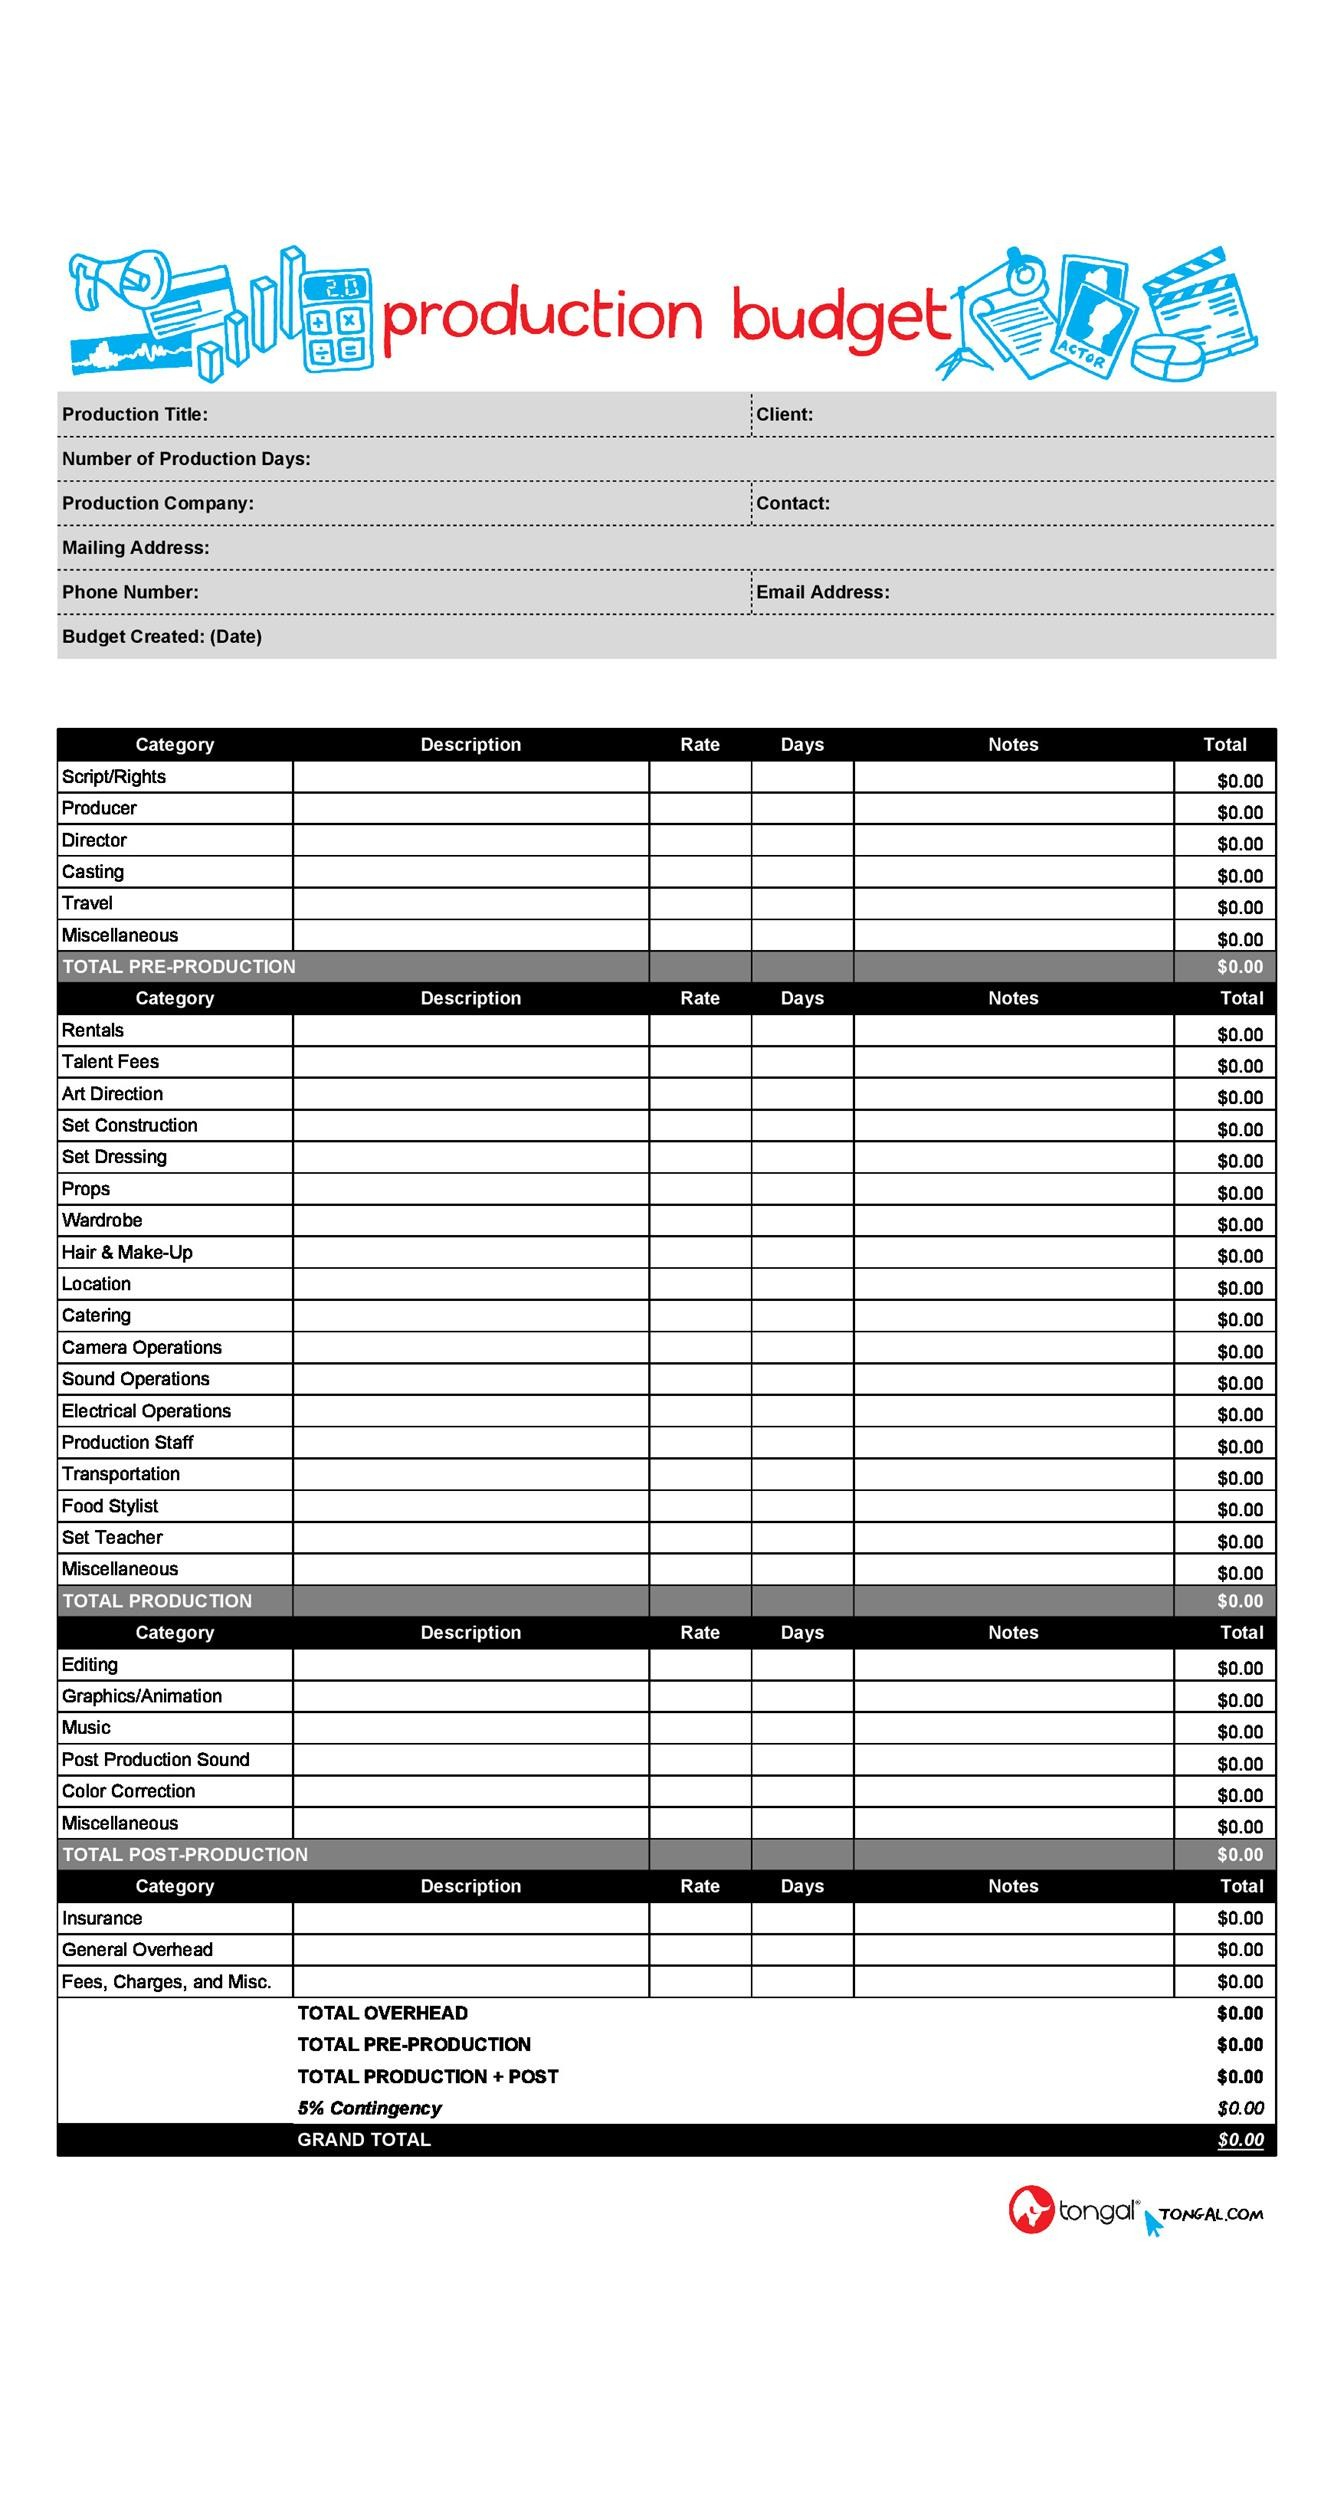 11 Free Film Budget Templates (Excel, Word) ᐅ TemplateLab Pertaining To Music Video Budget Template Intended For Music Video Budget Template